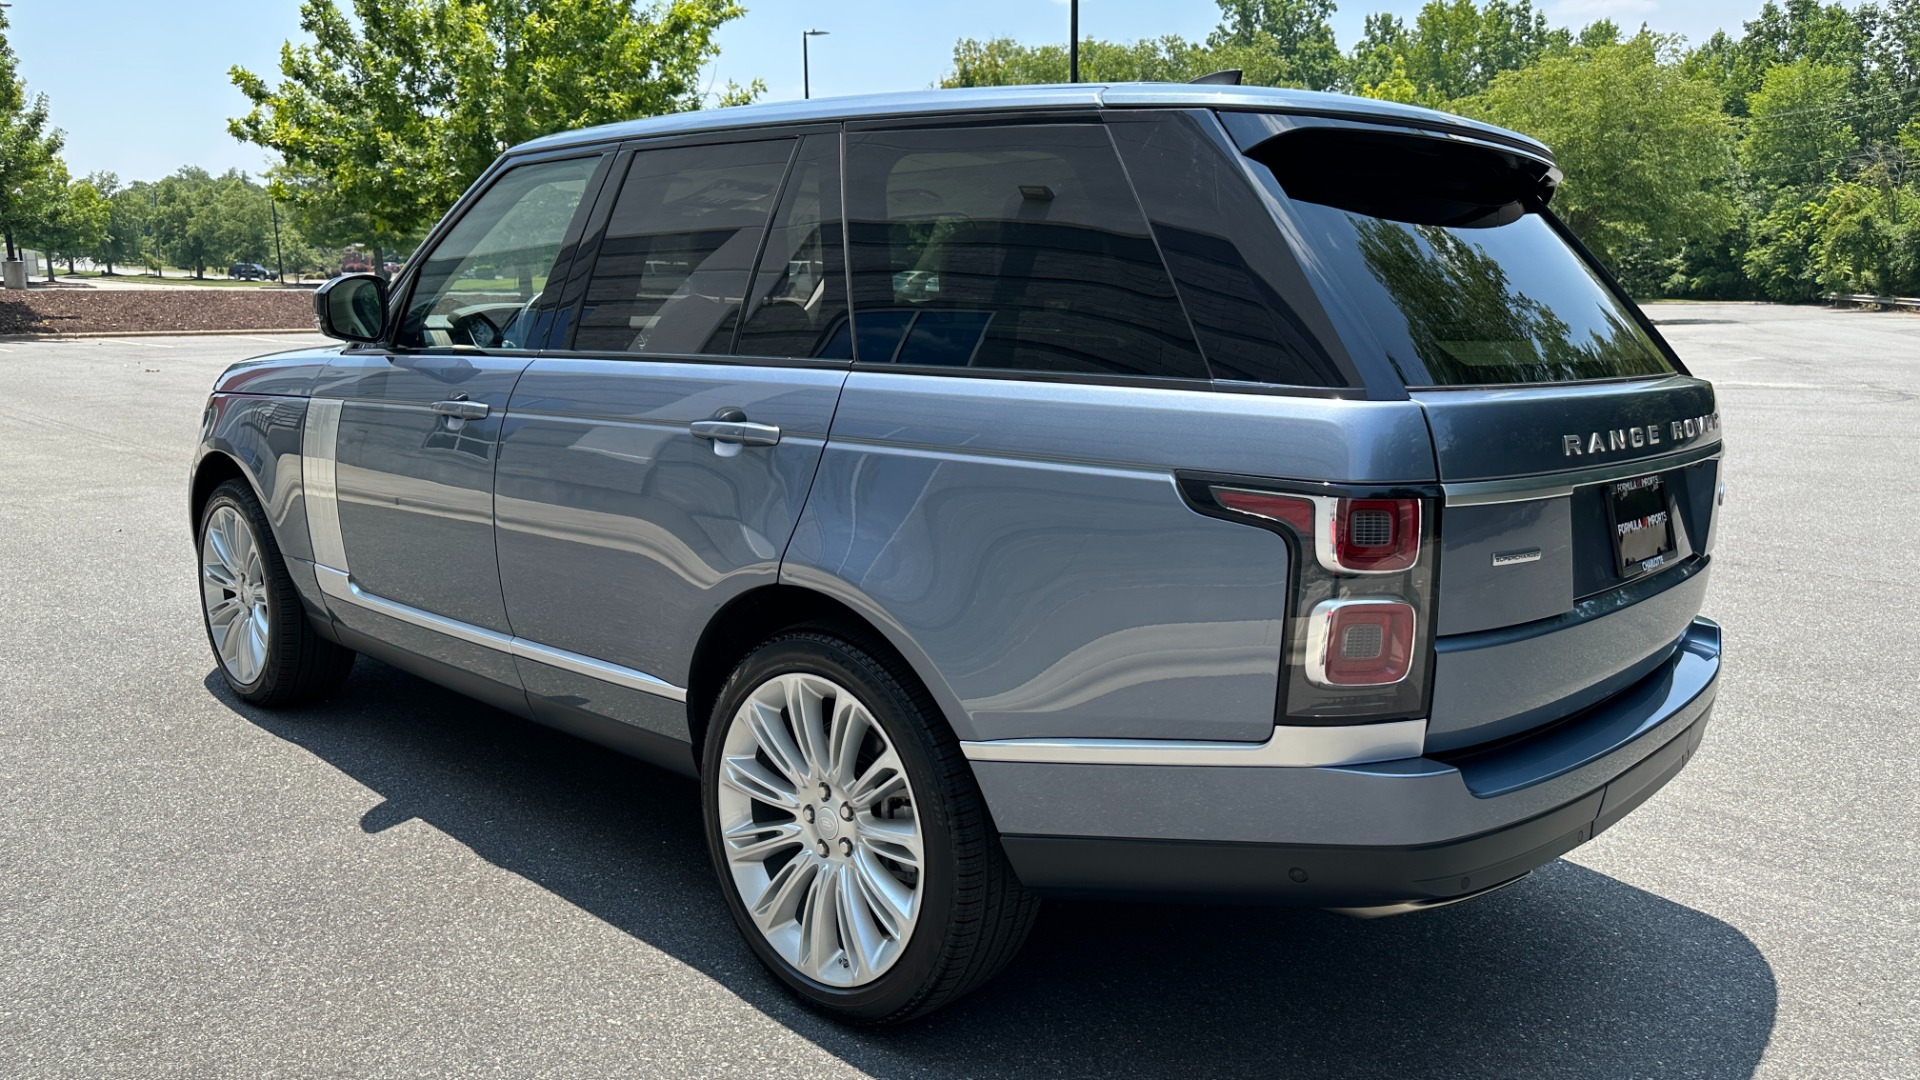 Used 2019 Land Rover Range Rover SUPERCHARGED / 22IN WHEELS / MERIDIAN SOUND / ATLAS ACCENTS for sale $69,100 at Formula Imports in Charlotte NC 28227 7